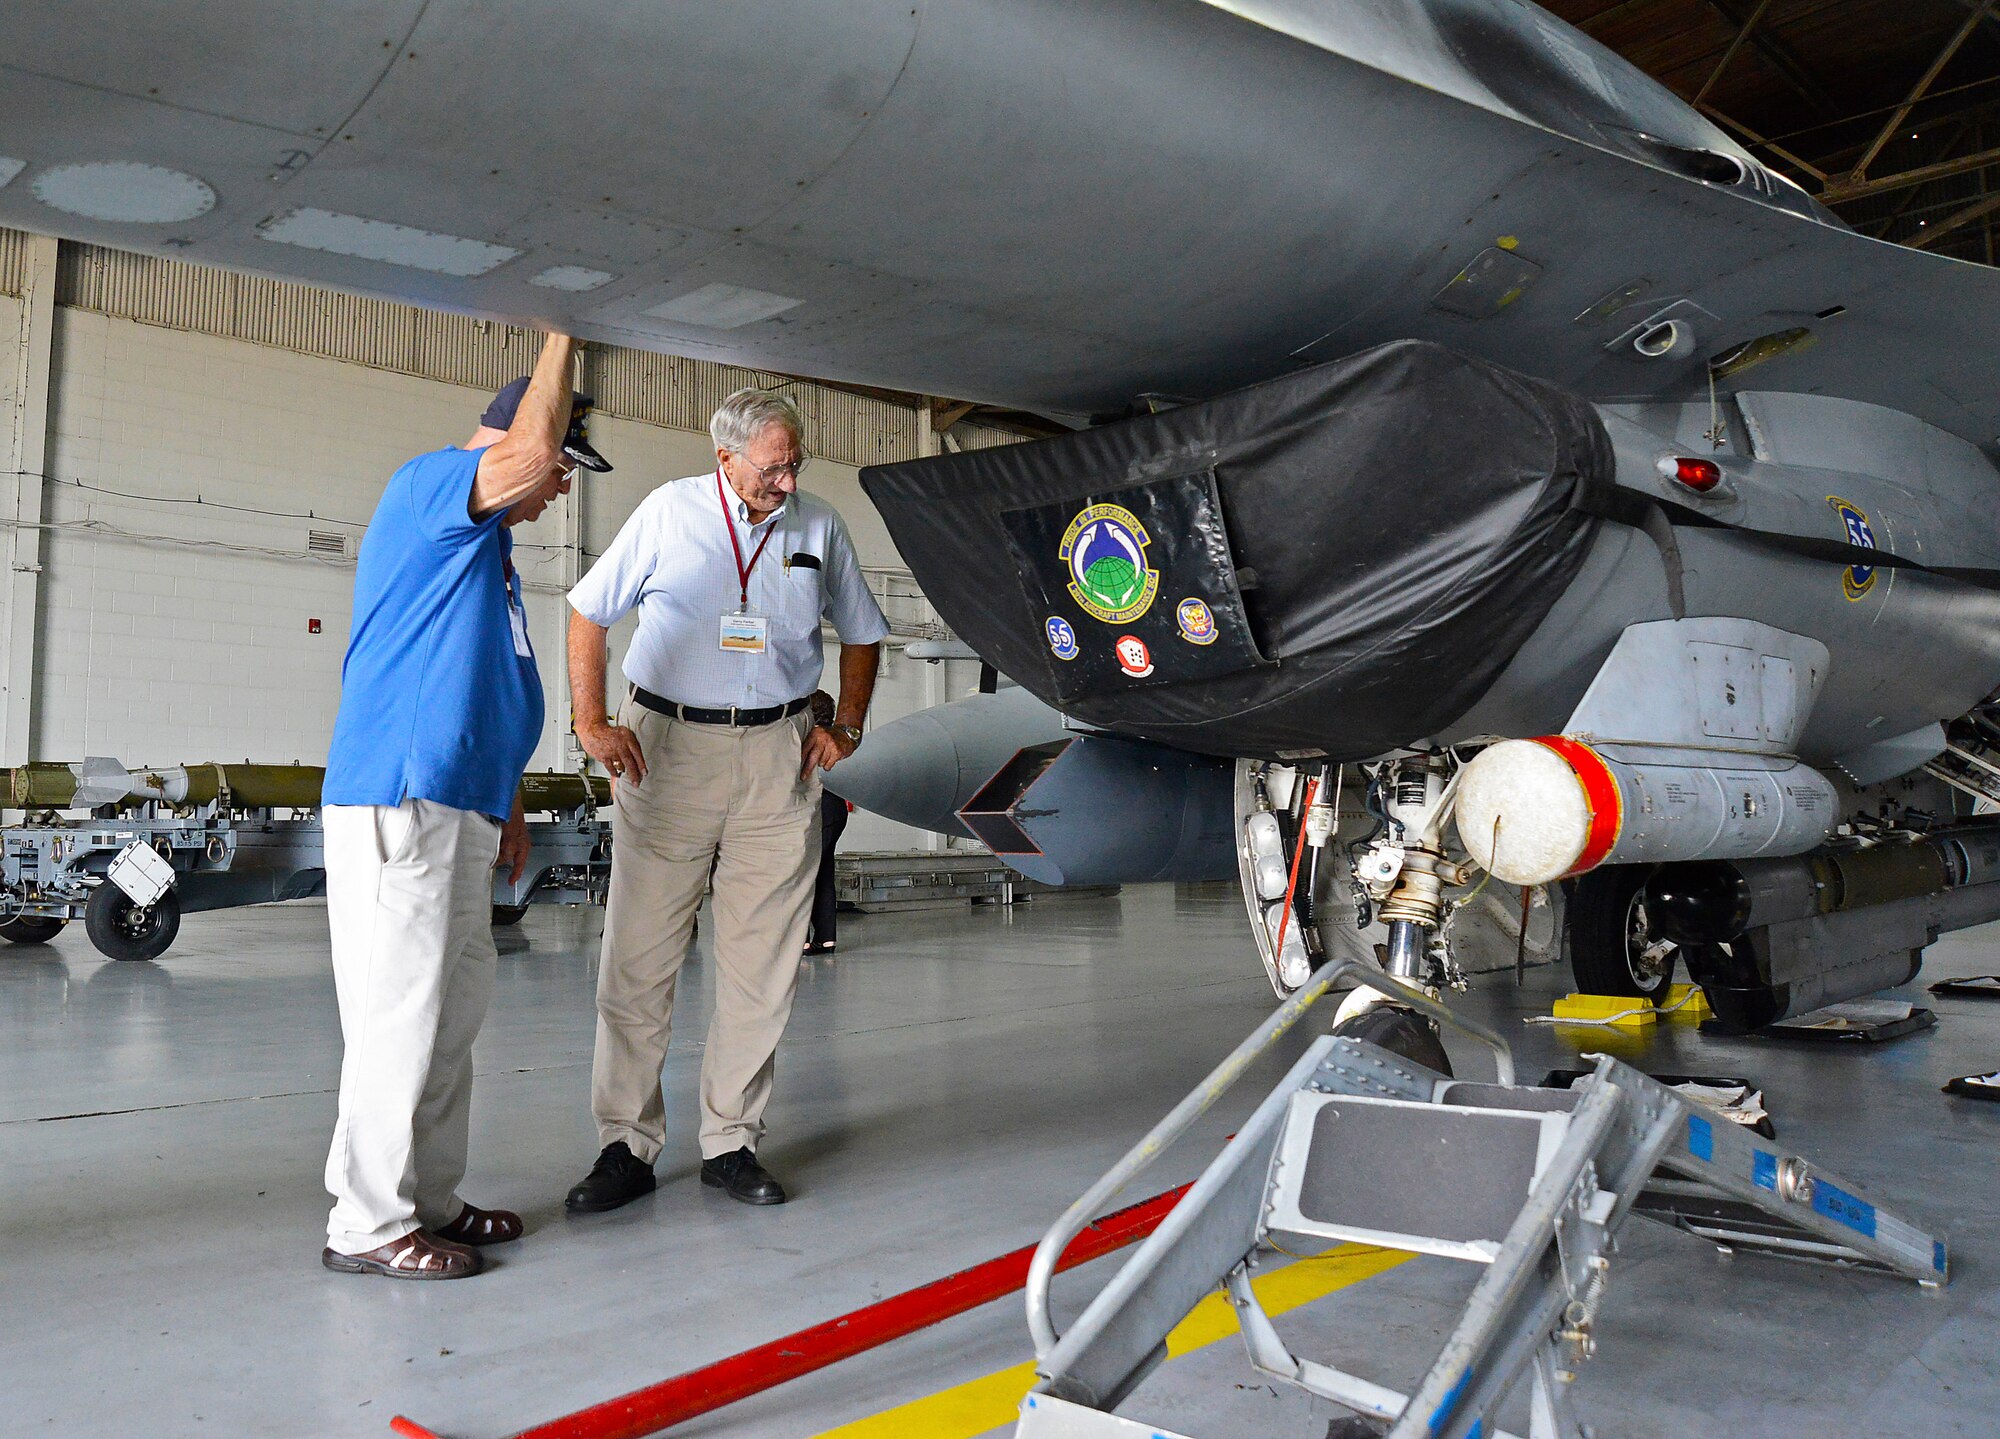 Two U.S. Air Force veterans take a closer look at a F-16 Fighting Falcon during a B-66 Destroyer reunion at Shaw Air Force Base, S.C., Aug. 30, 2016. Approximately 100 veterans from around the U.S. attended the reunion. (U.S. Air Force photo by Airman BrieAnna Stillman)  